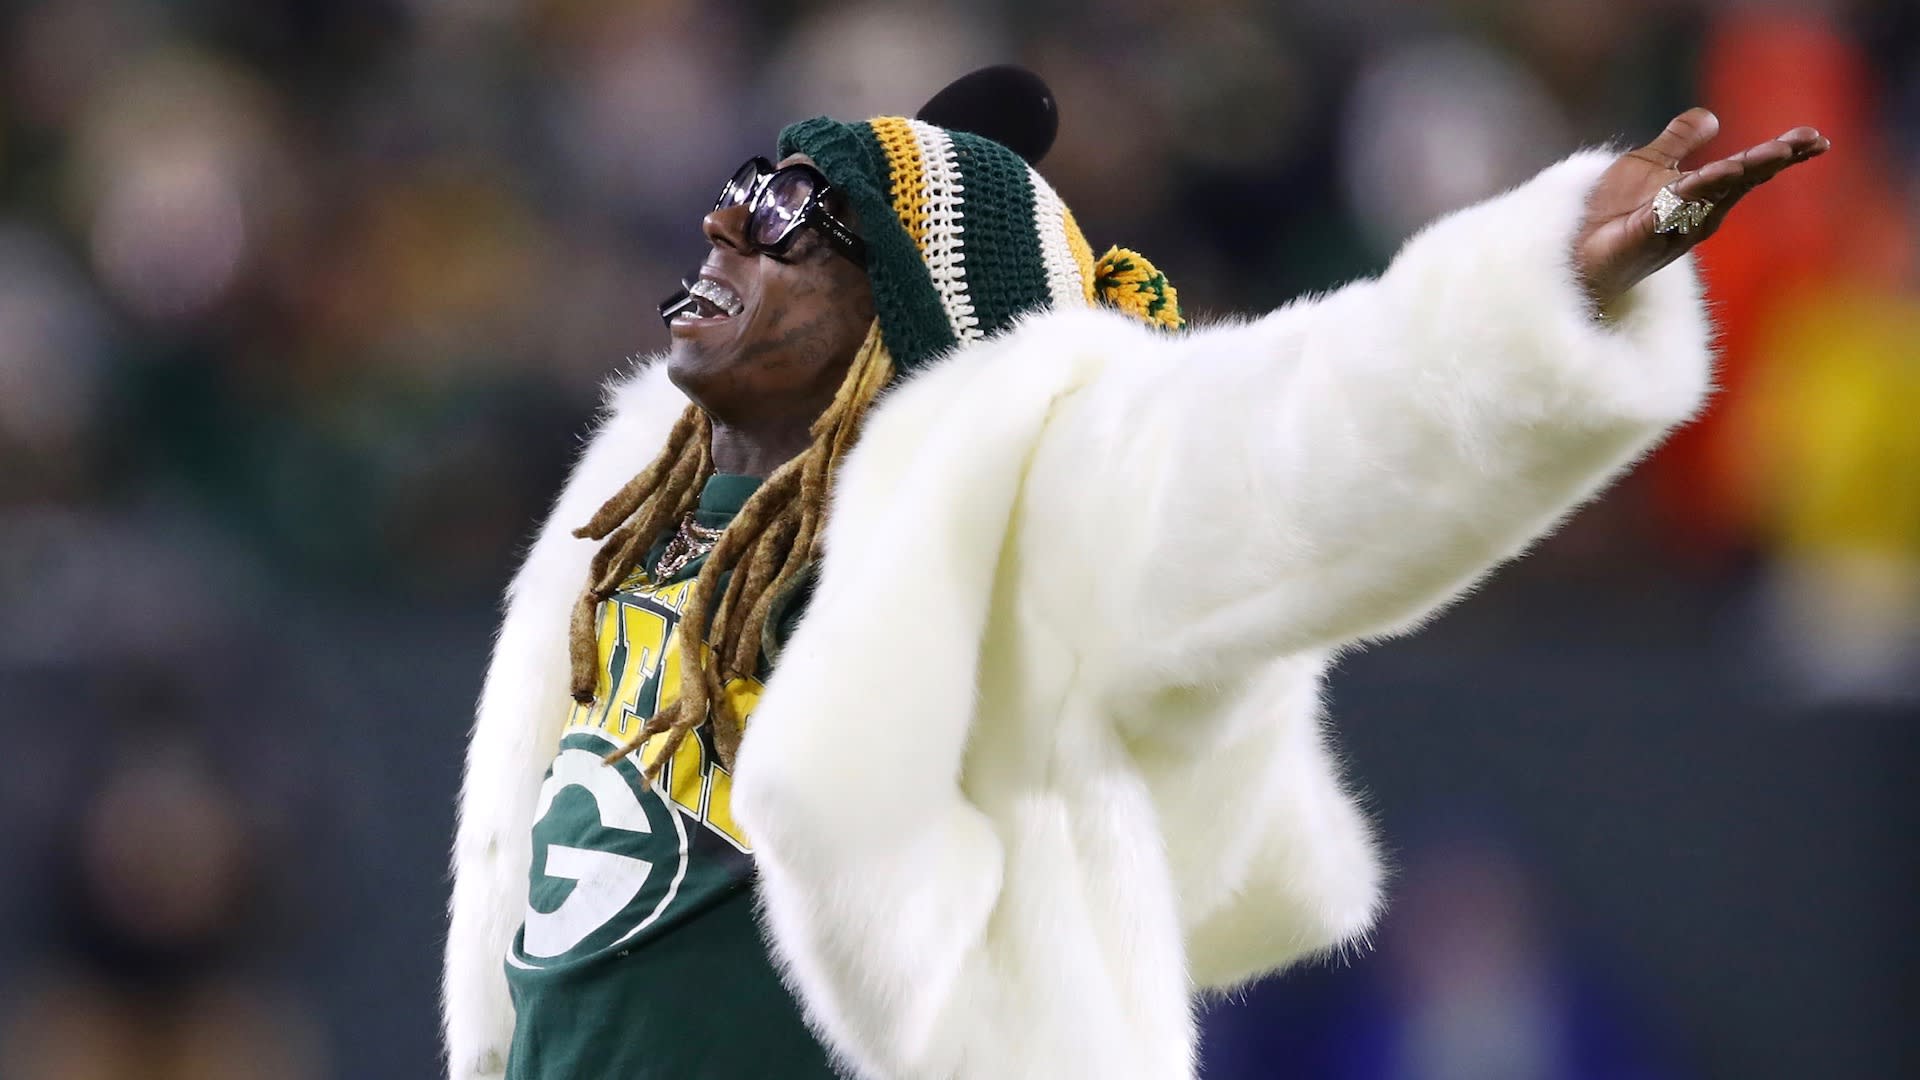 Lil Wayne releases Green Bay Packers Hype anthem “Green and Yellow (Green Bay Packers theme song)”